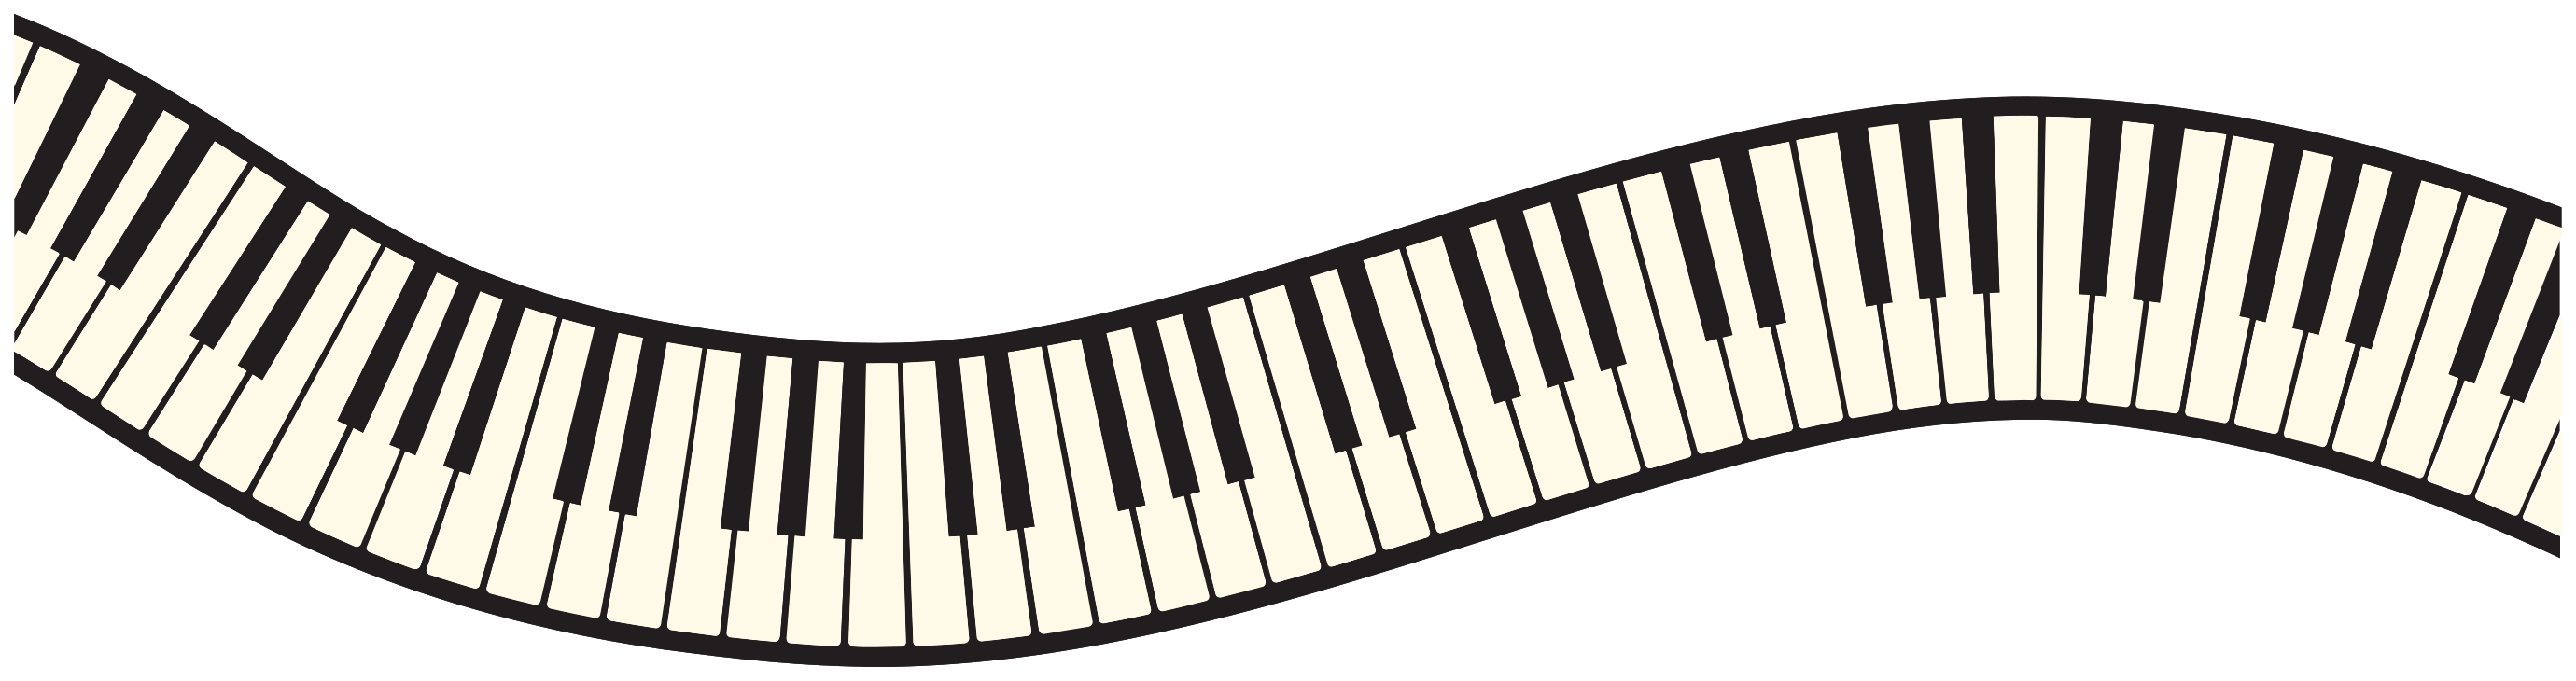 Piano Vector PNG Image High Quality PNG Image